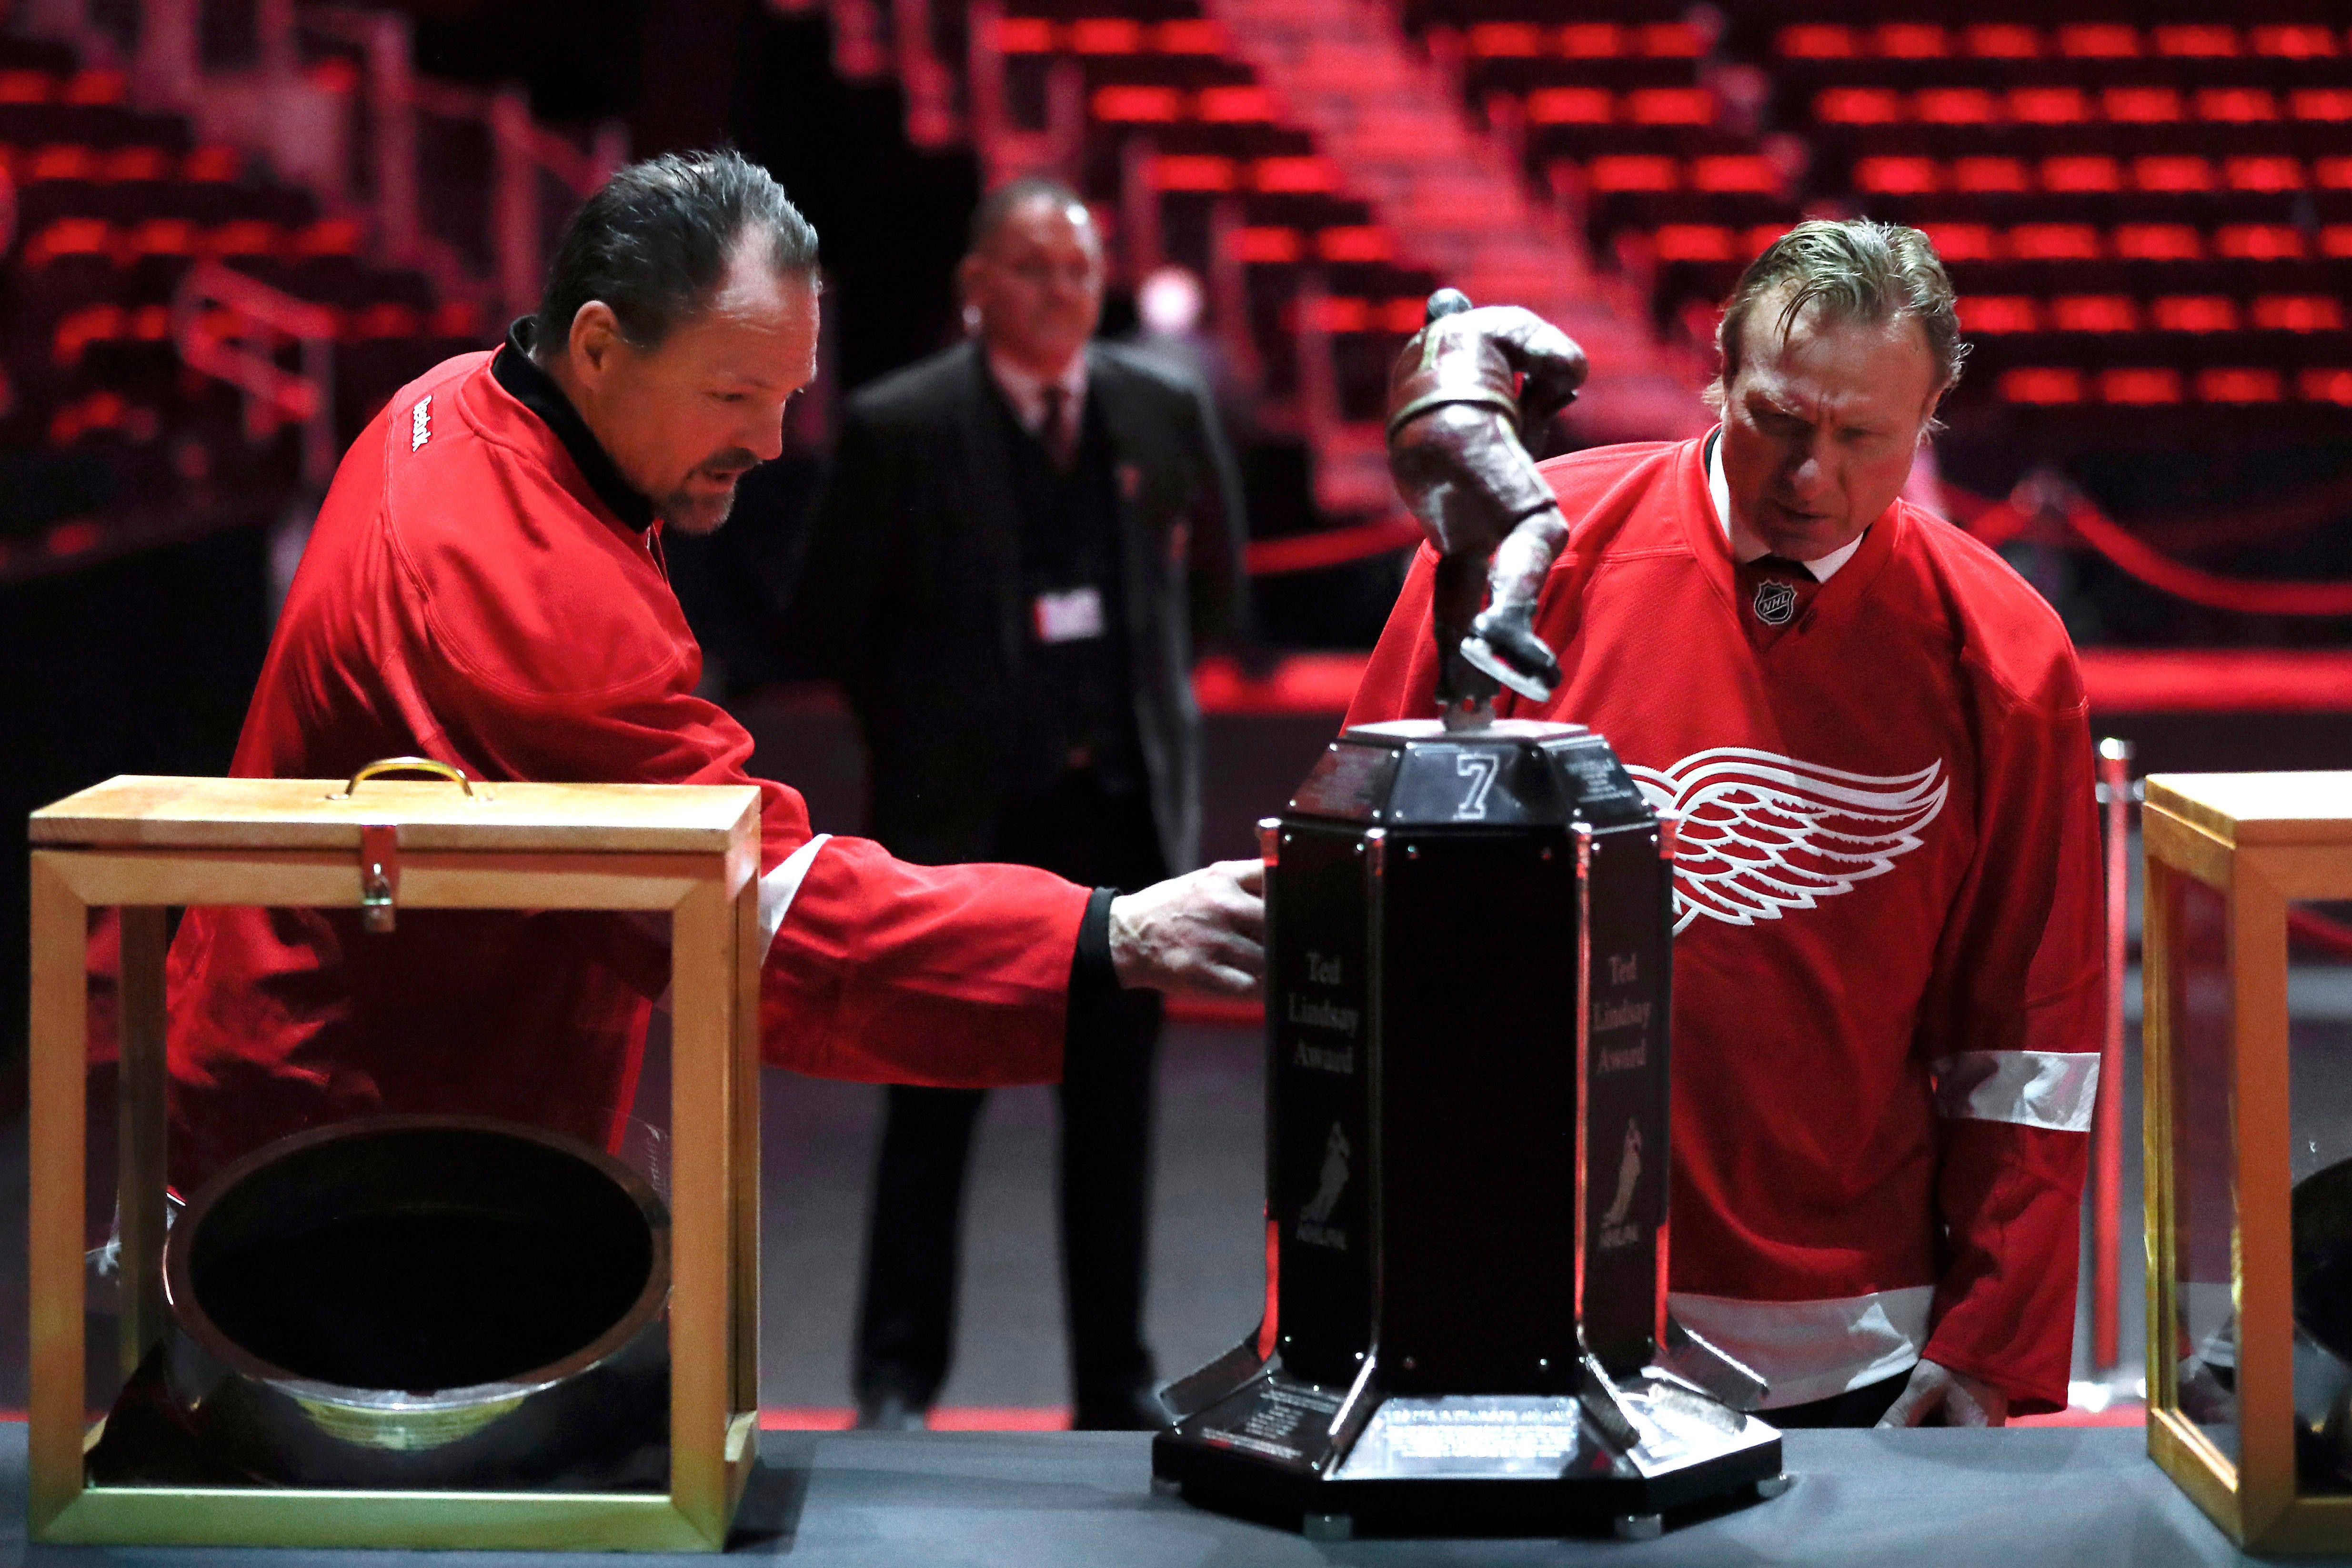 Former Detroit Red Wings players Joe Kocur and Eddie Mio view memorabilia at the public viewing for Ted Lindsay.